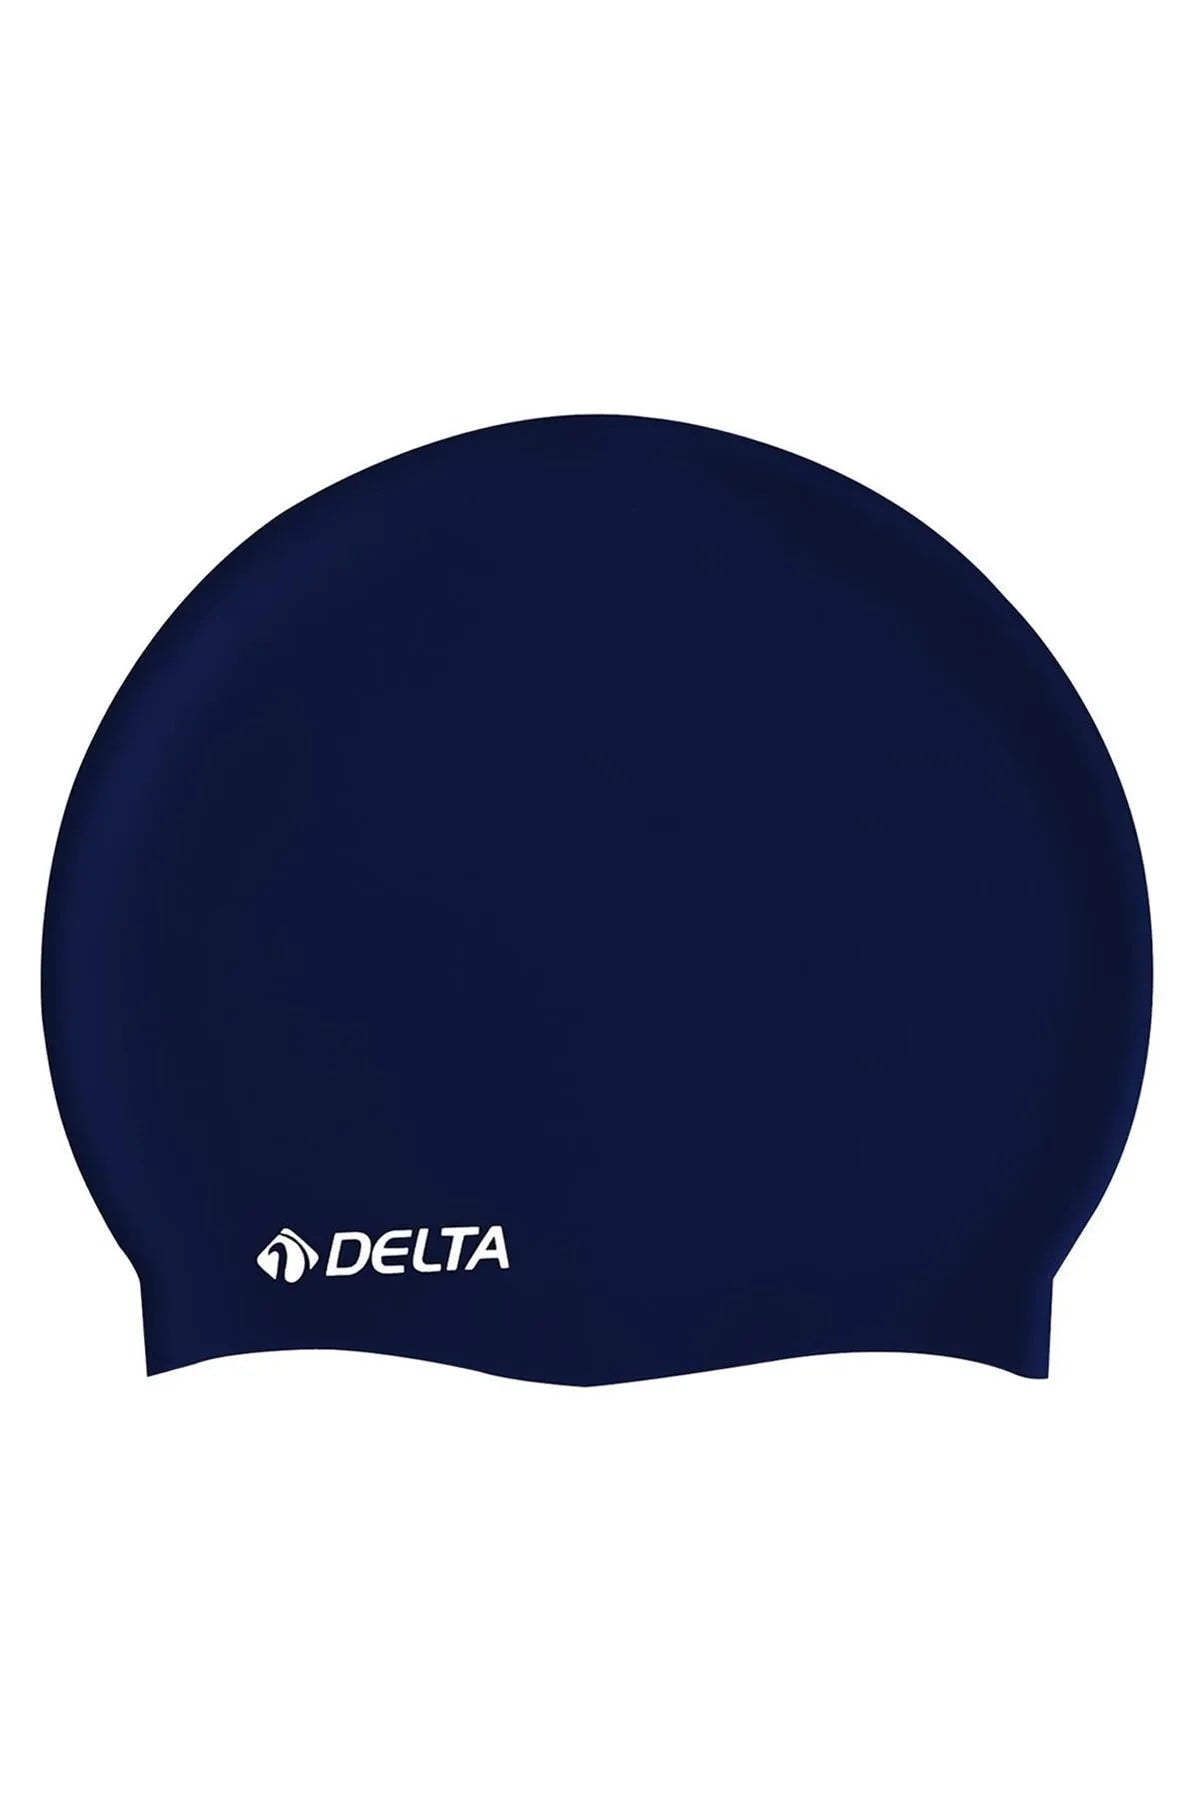 Silicone Bone Deluxe Swim Cap - Solid Navy Blue for Pool and Sea | Ideal for Braids, Dreadlocks, and Long Hair | Includes Free Ear Plugs and PVC Storage Bag